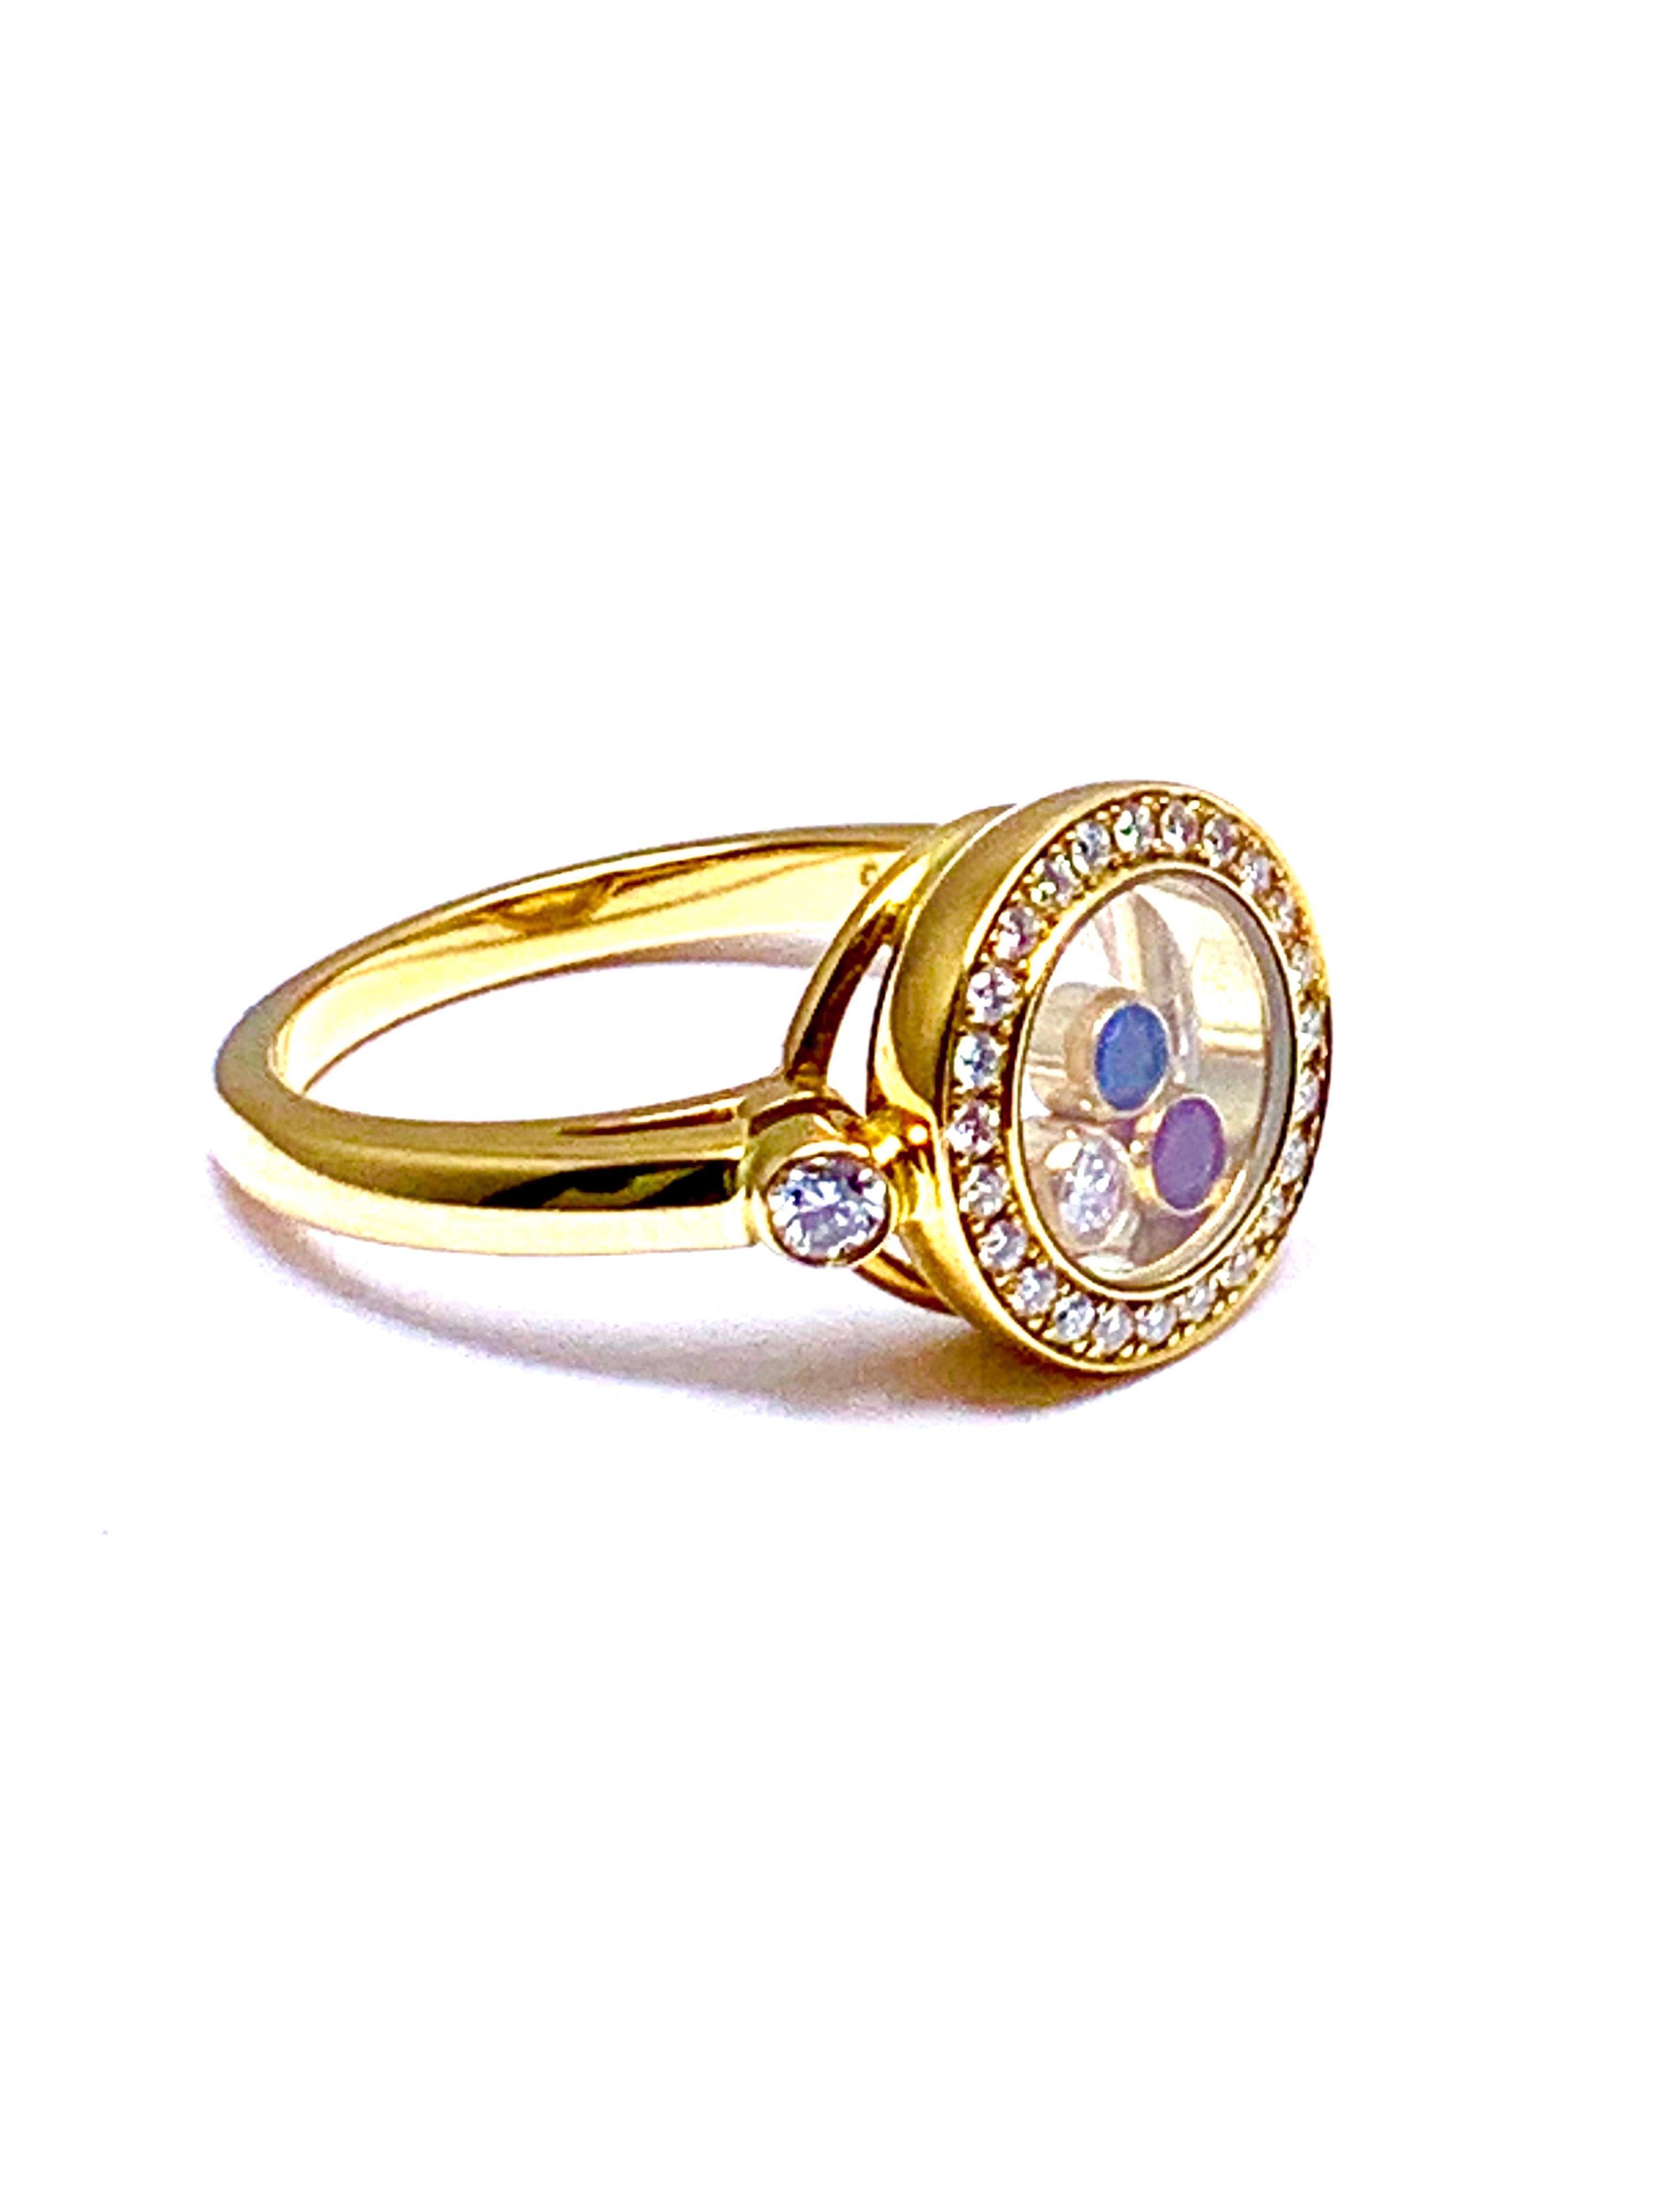 An iconic Chopard fashion ring from the 